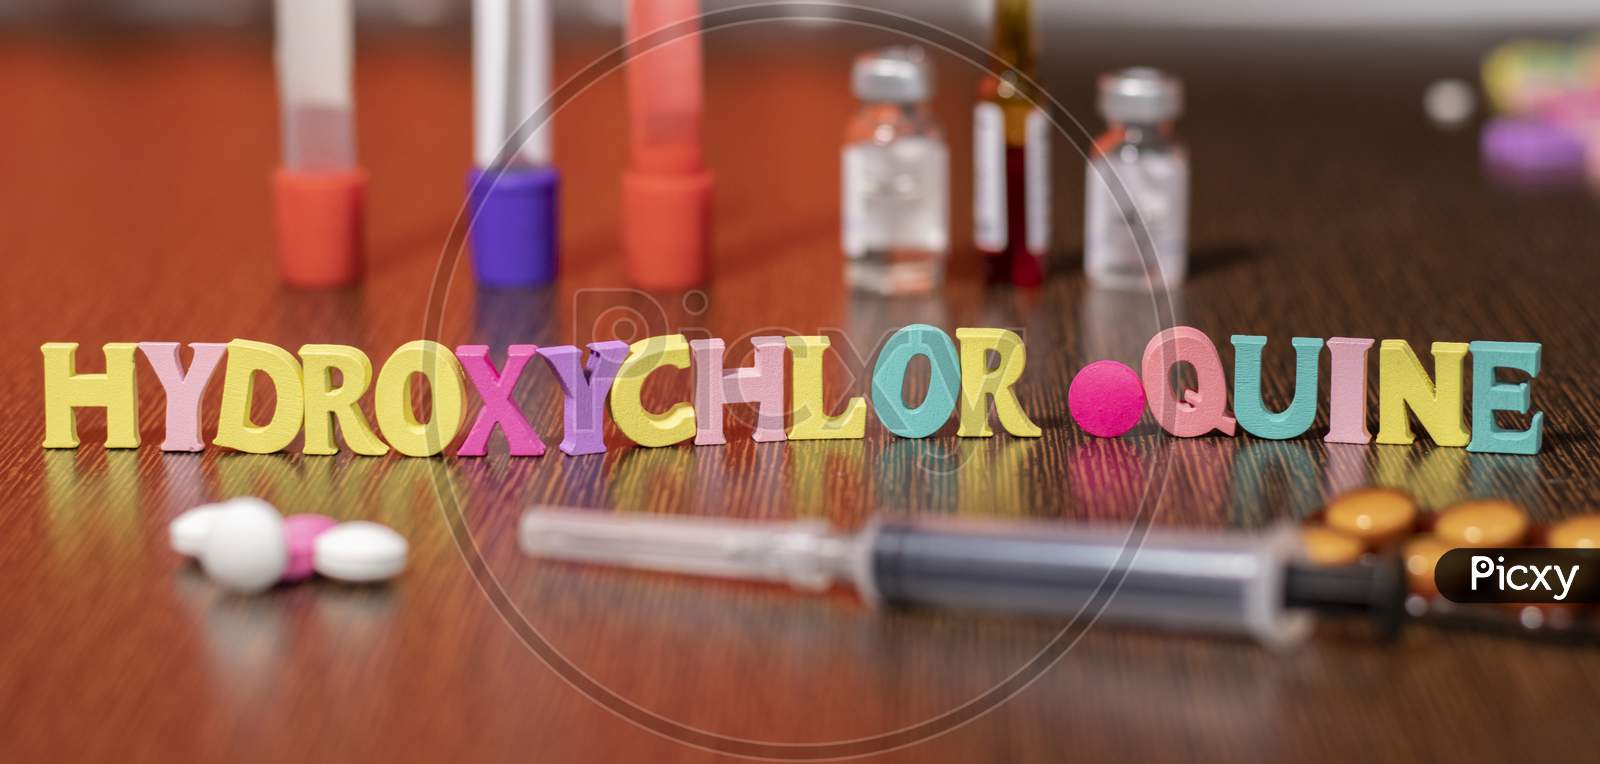 Hydroxychloroquine Or Hcq Drug In Colourful Letters On Table Used For Malaria.